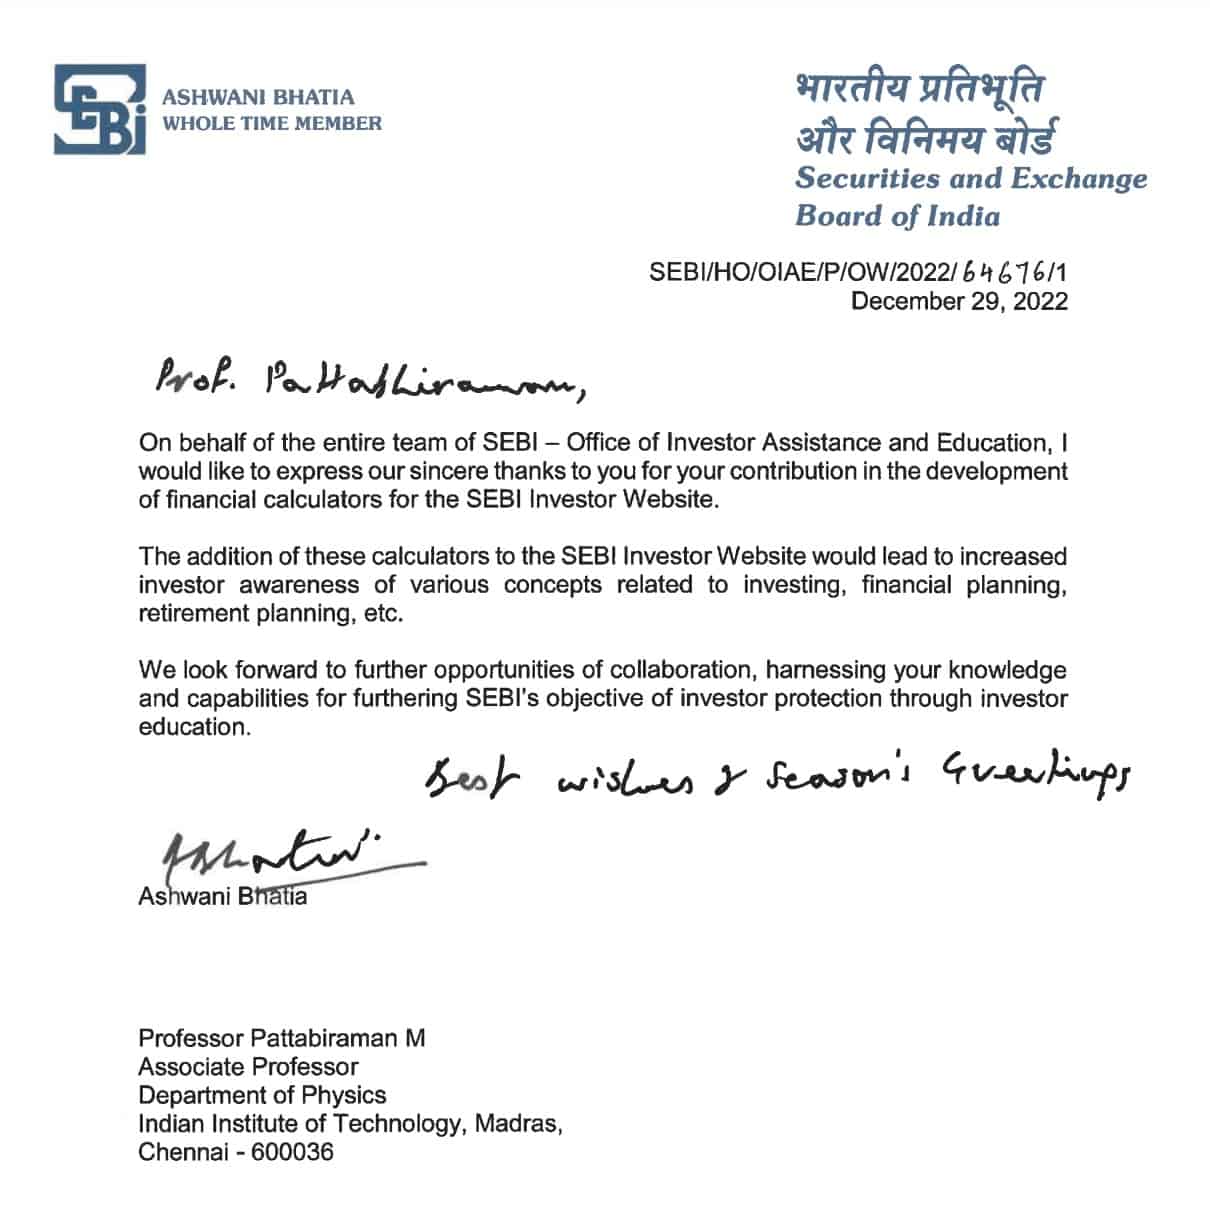 Letter of appreciation from Whole Time Member Shri Bhatia for Dr M Pattabiraman's contribution towards development of financial calculators for SEBI